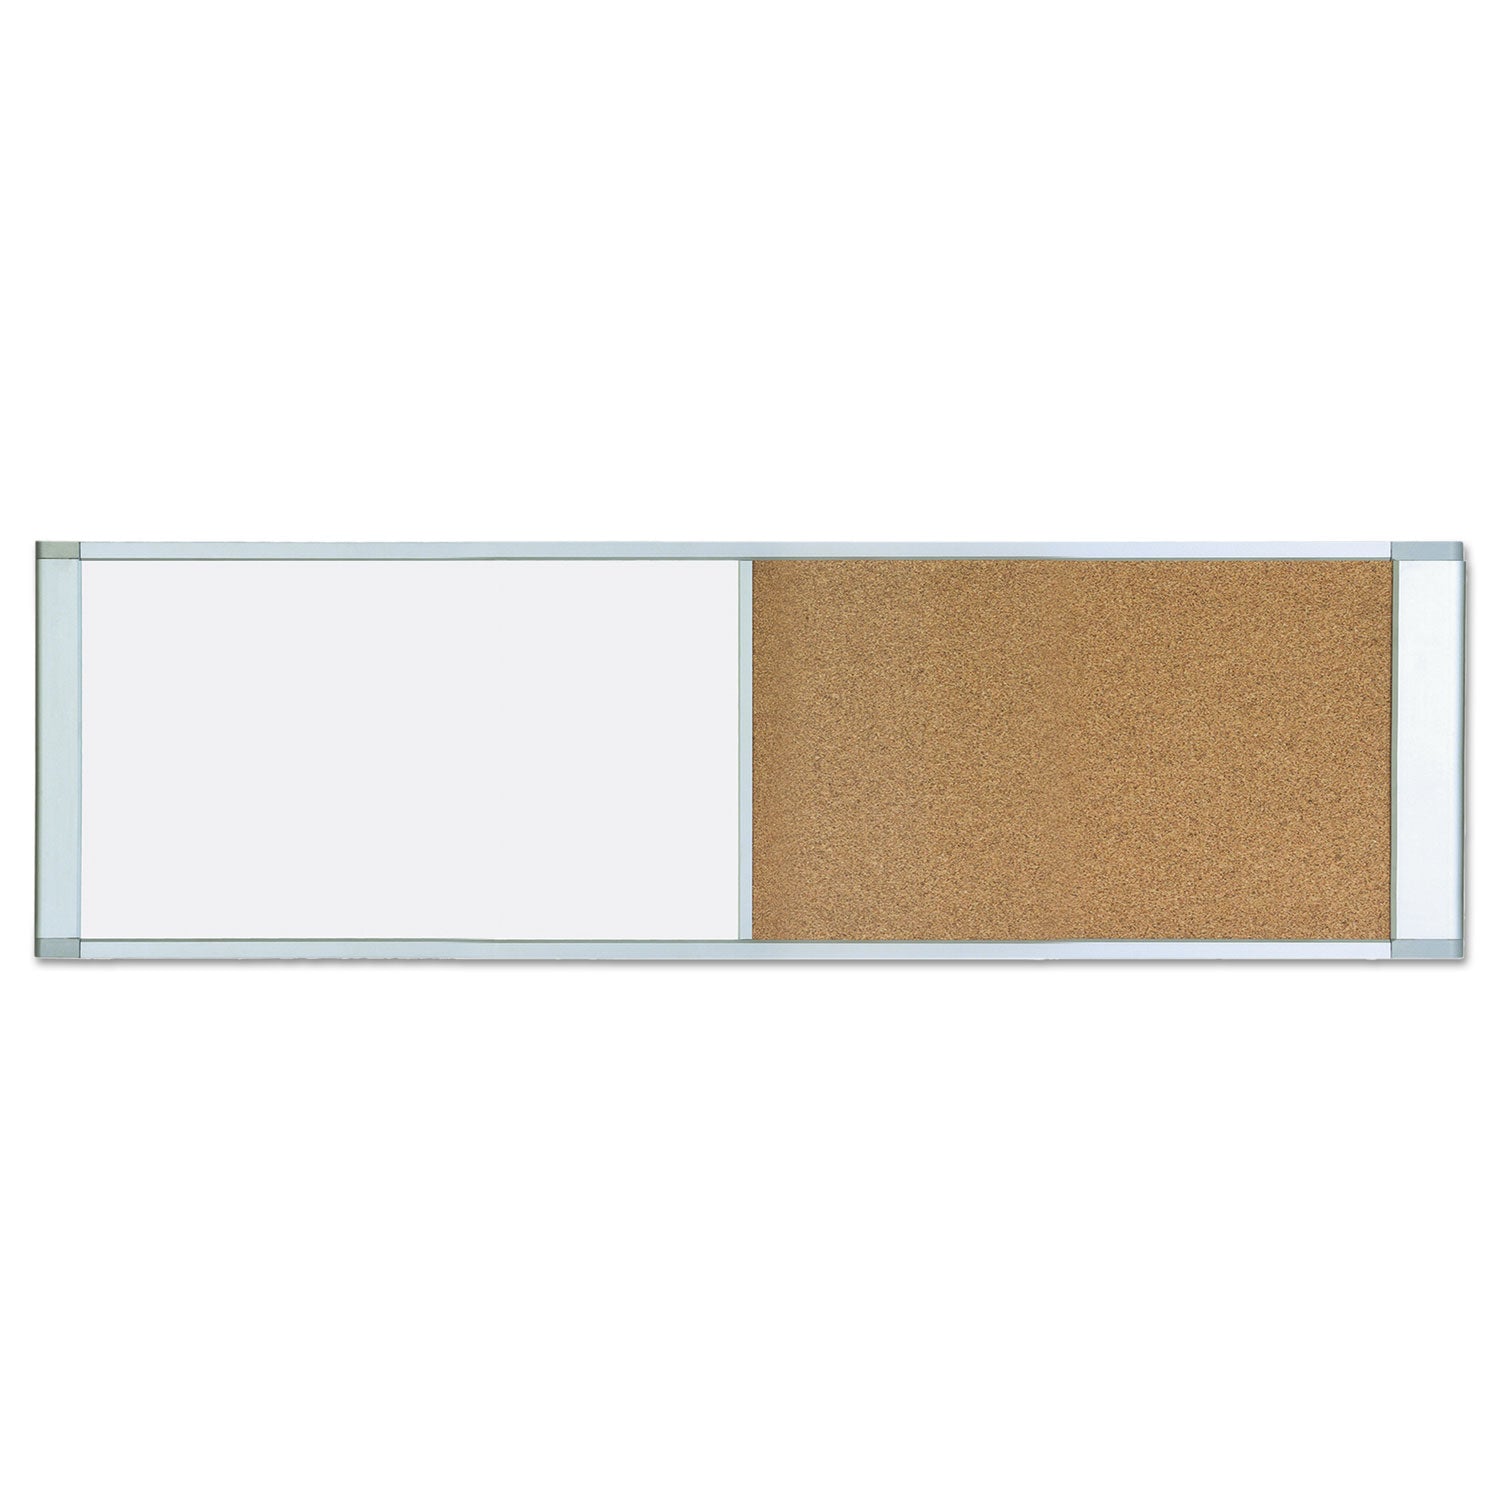 Combo Cubicle Workstation Dry Erase/Cork Board, 48 x 18, Tan/White Surface, Aluminum Frame - 